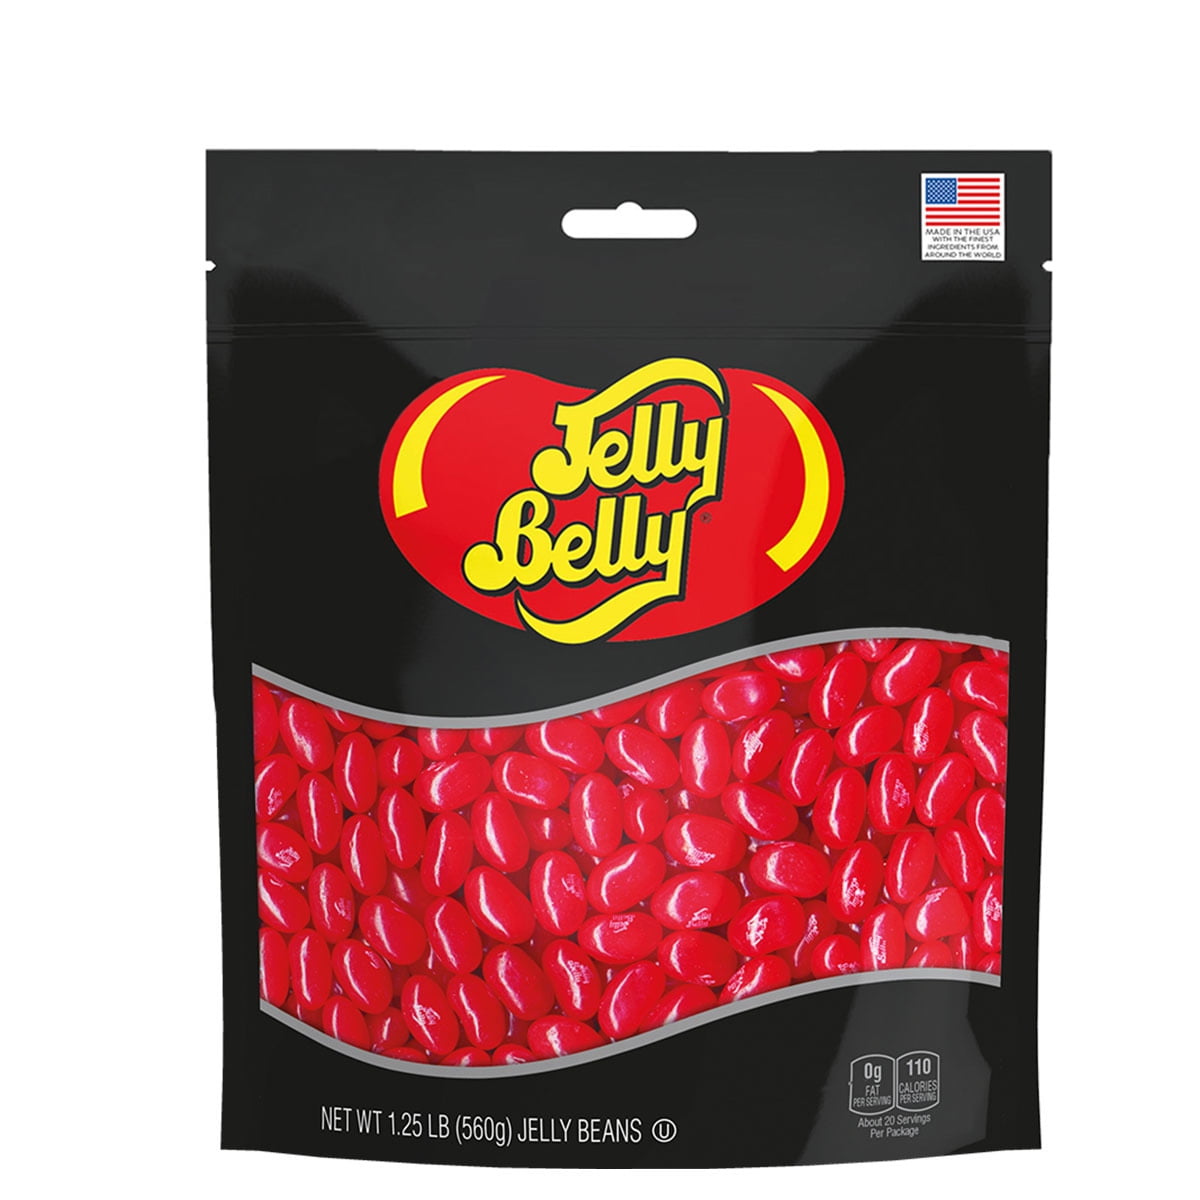 Mr Jelly Belly 8” Very Cherry Red Jelly Bean Bag Soft Plush Toy with Clip